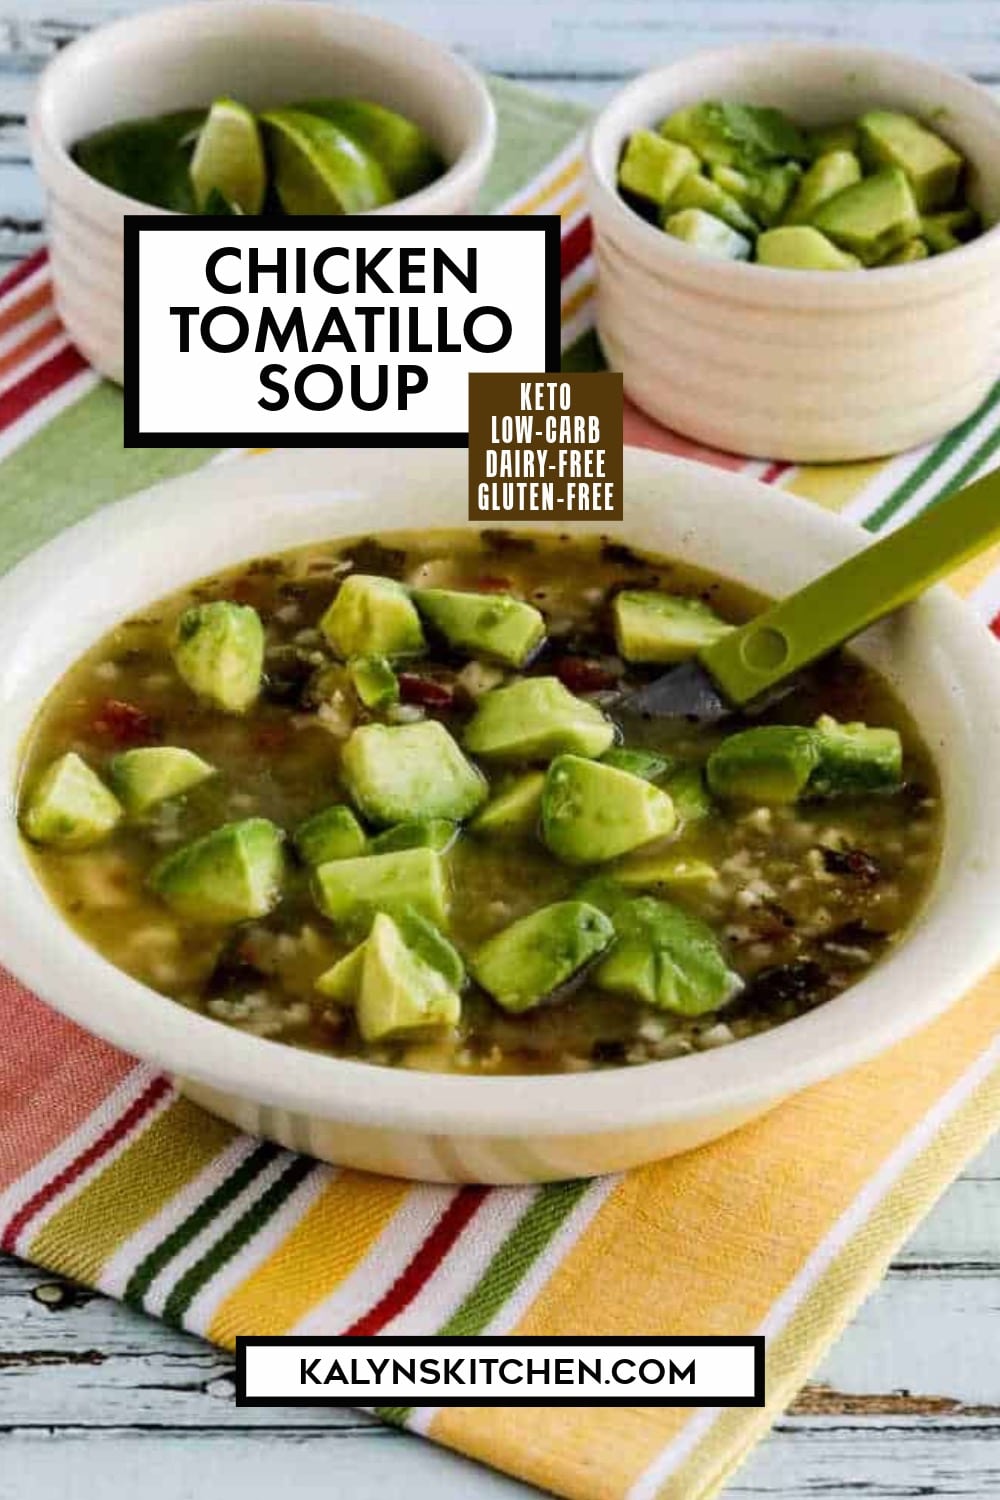 Pinterest image of Chicken Tomatillo Soup